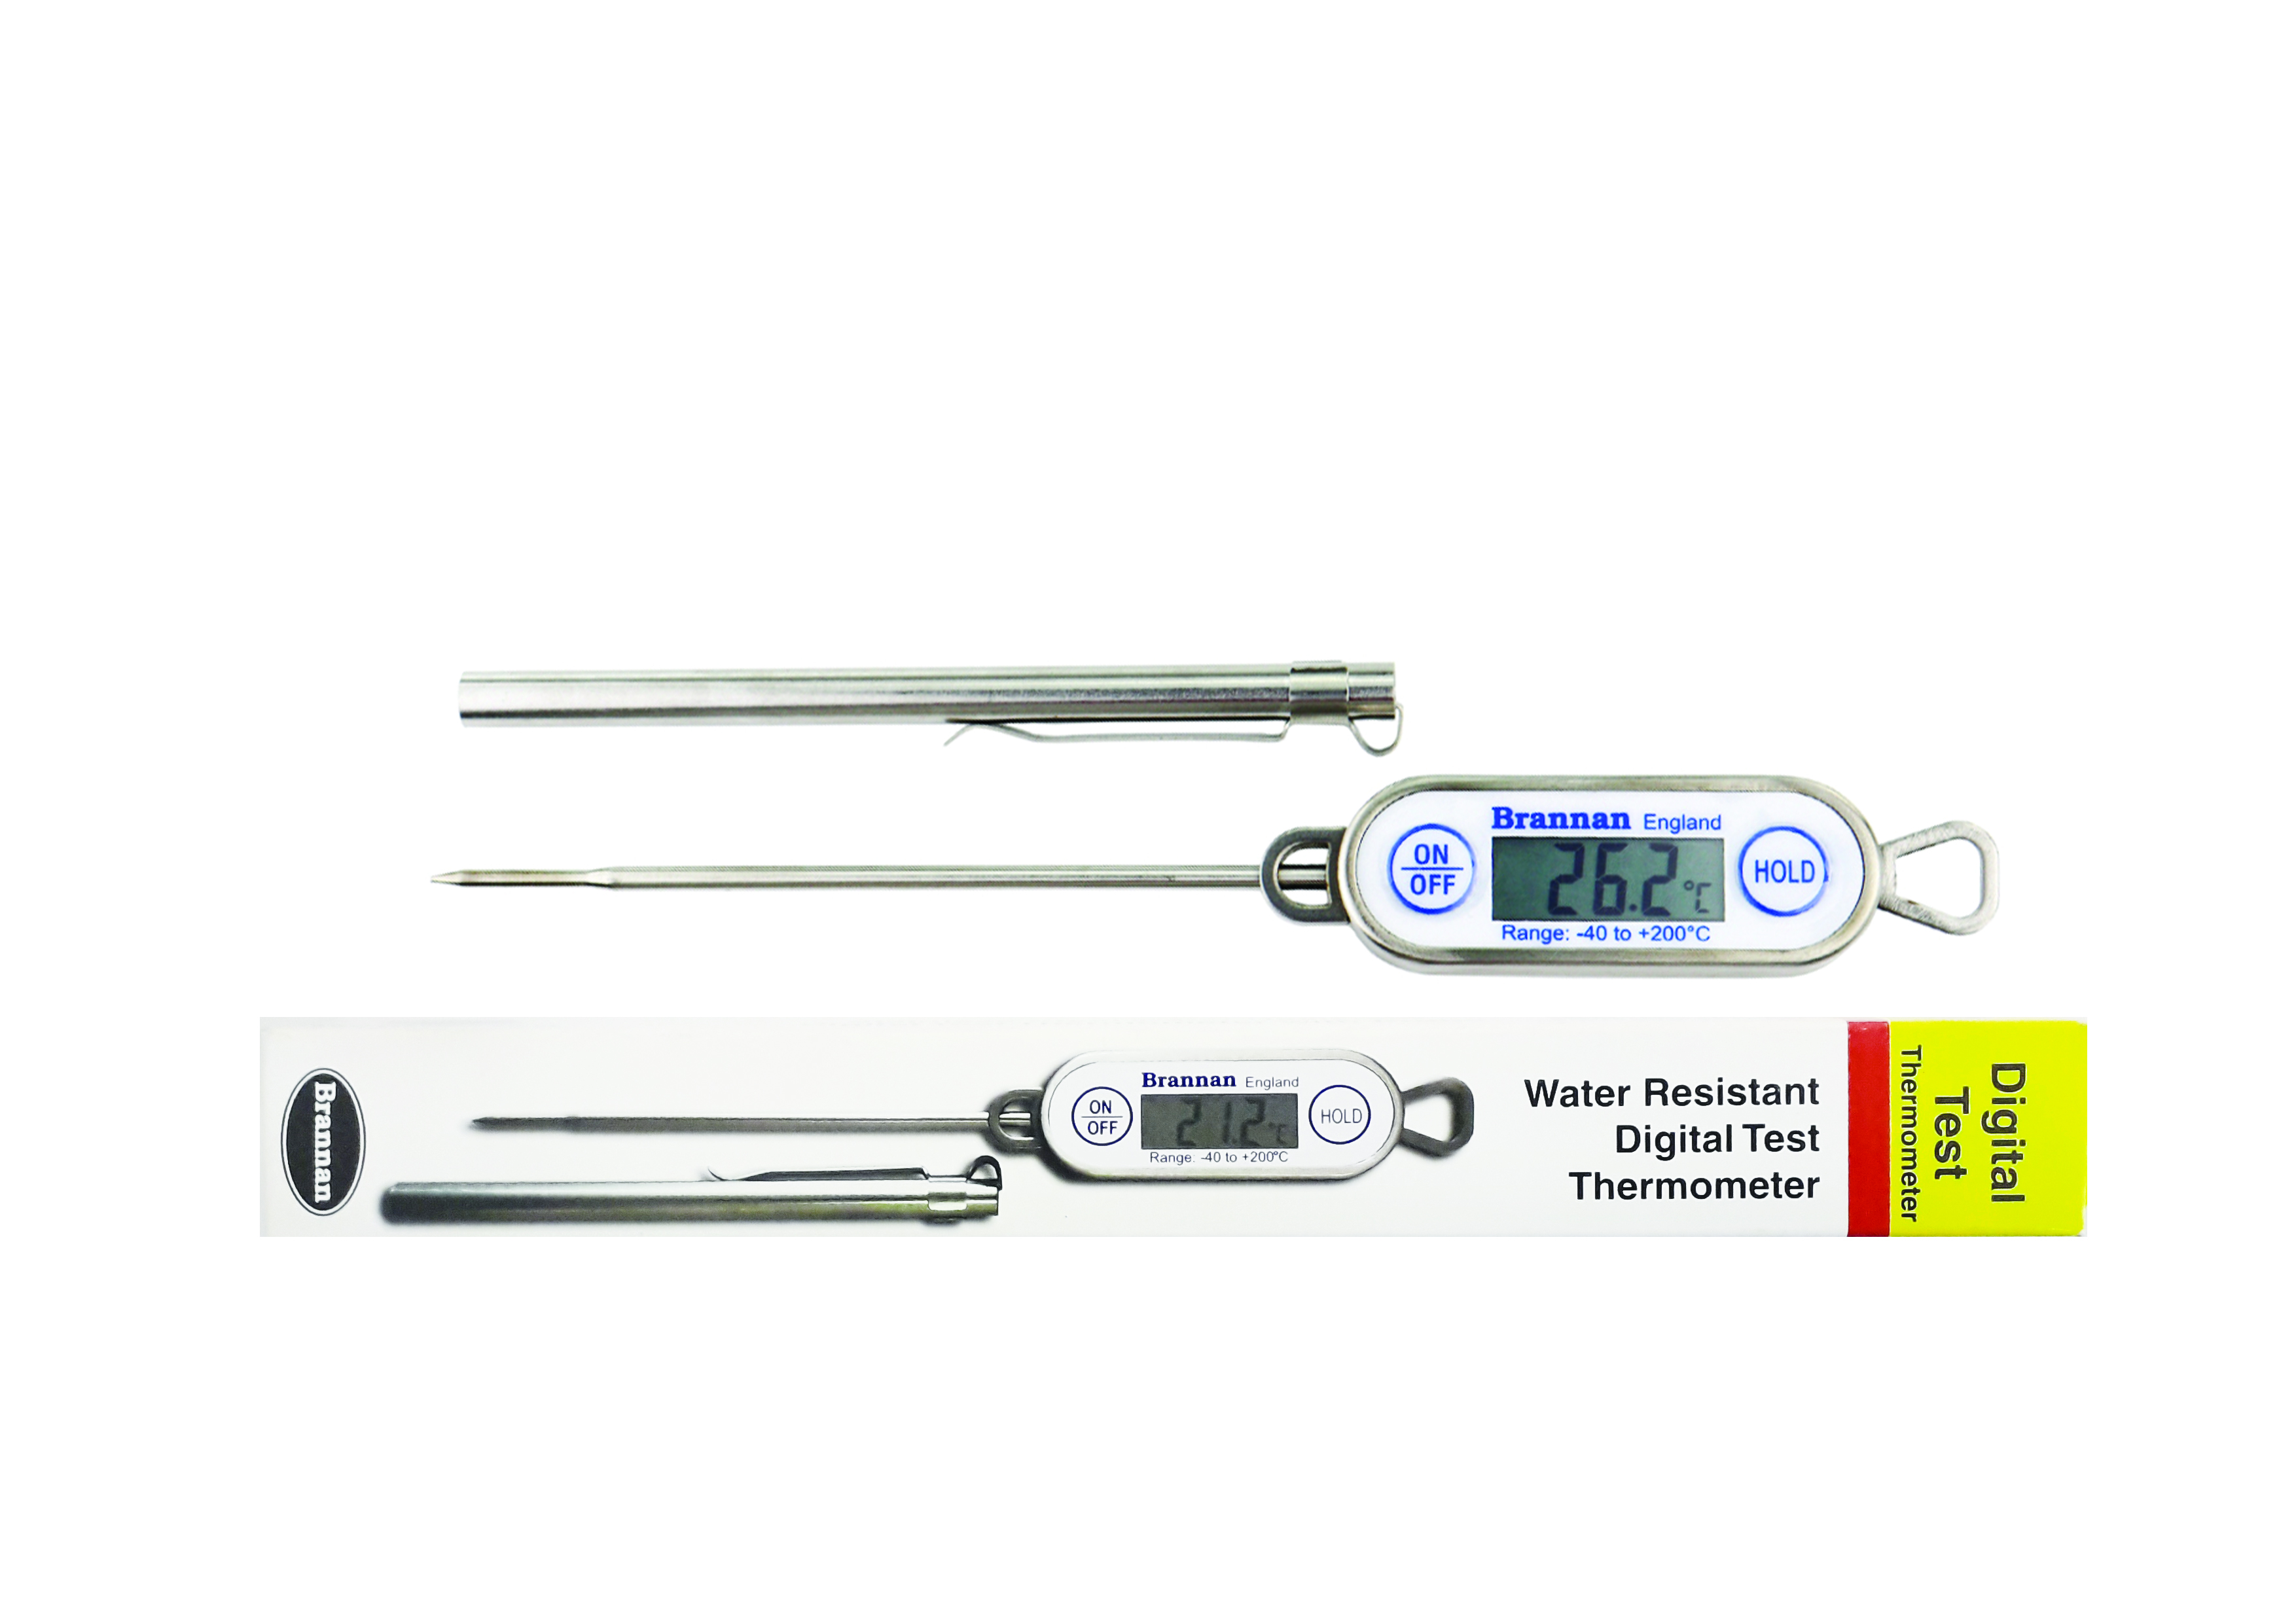 Stainless Steel Water Resistant Test Thermometer